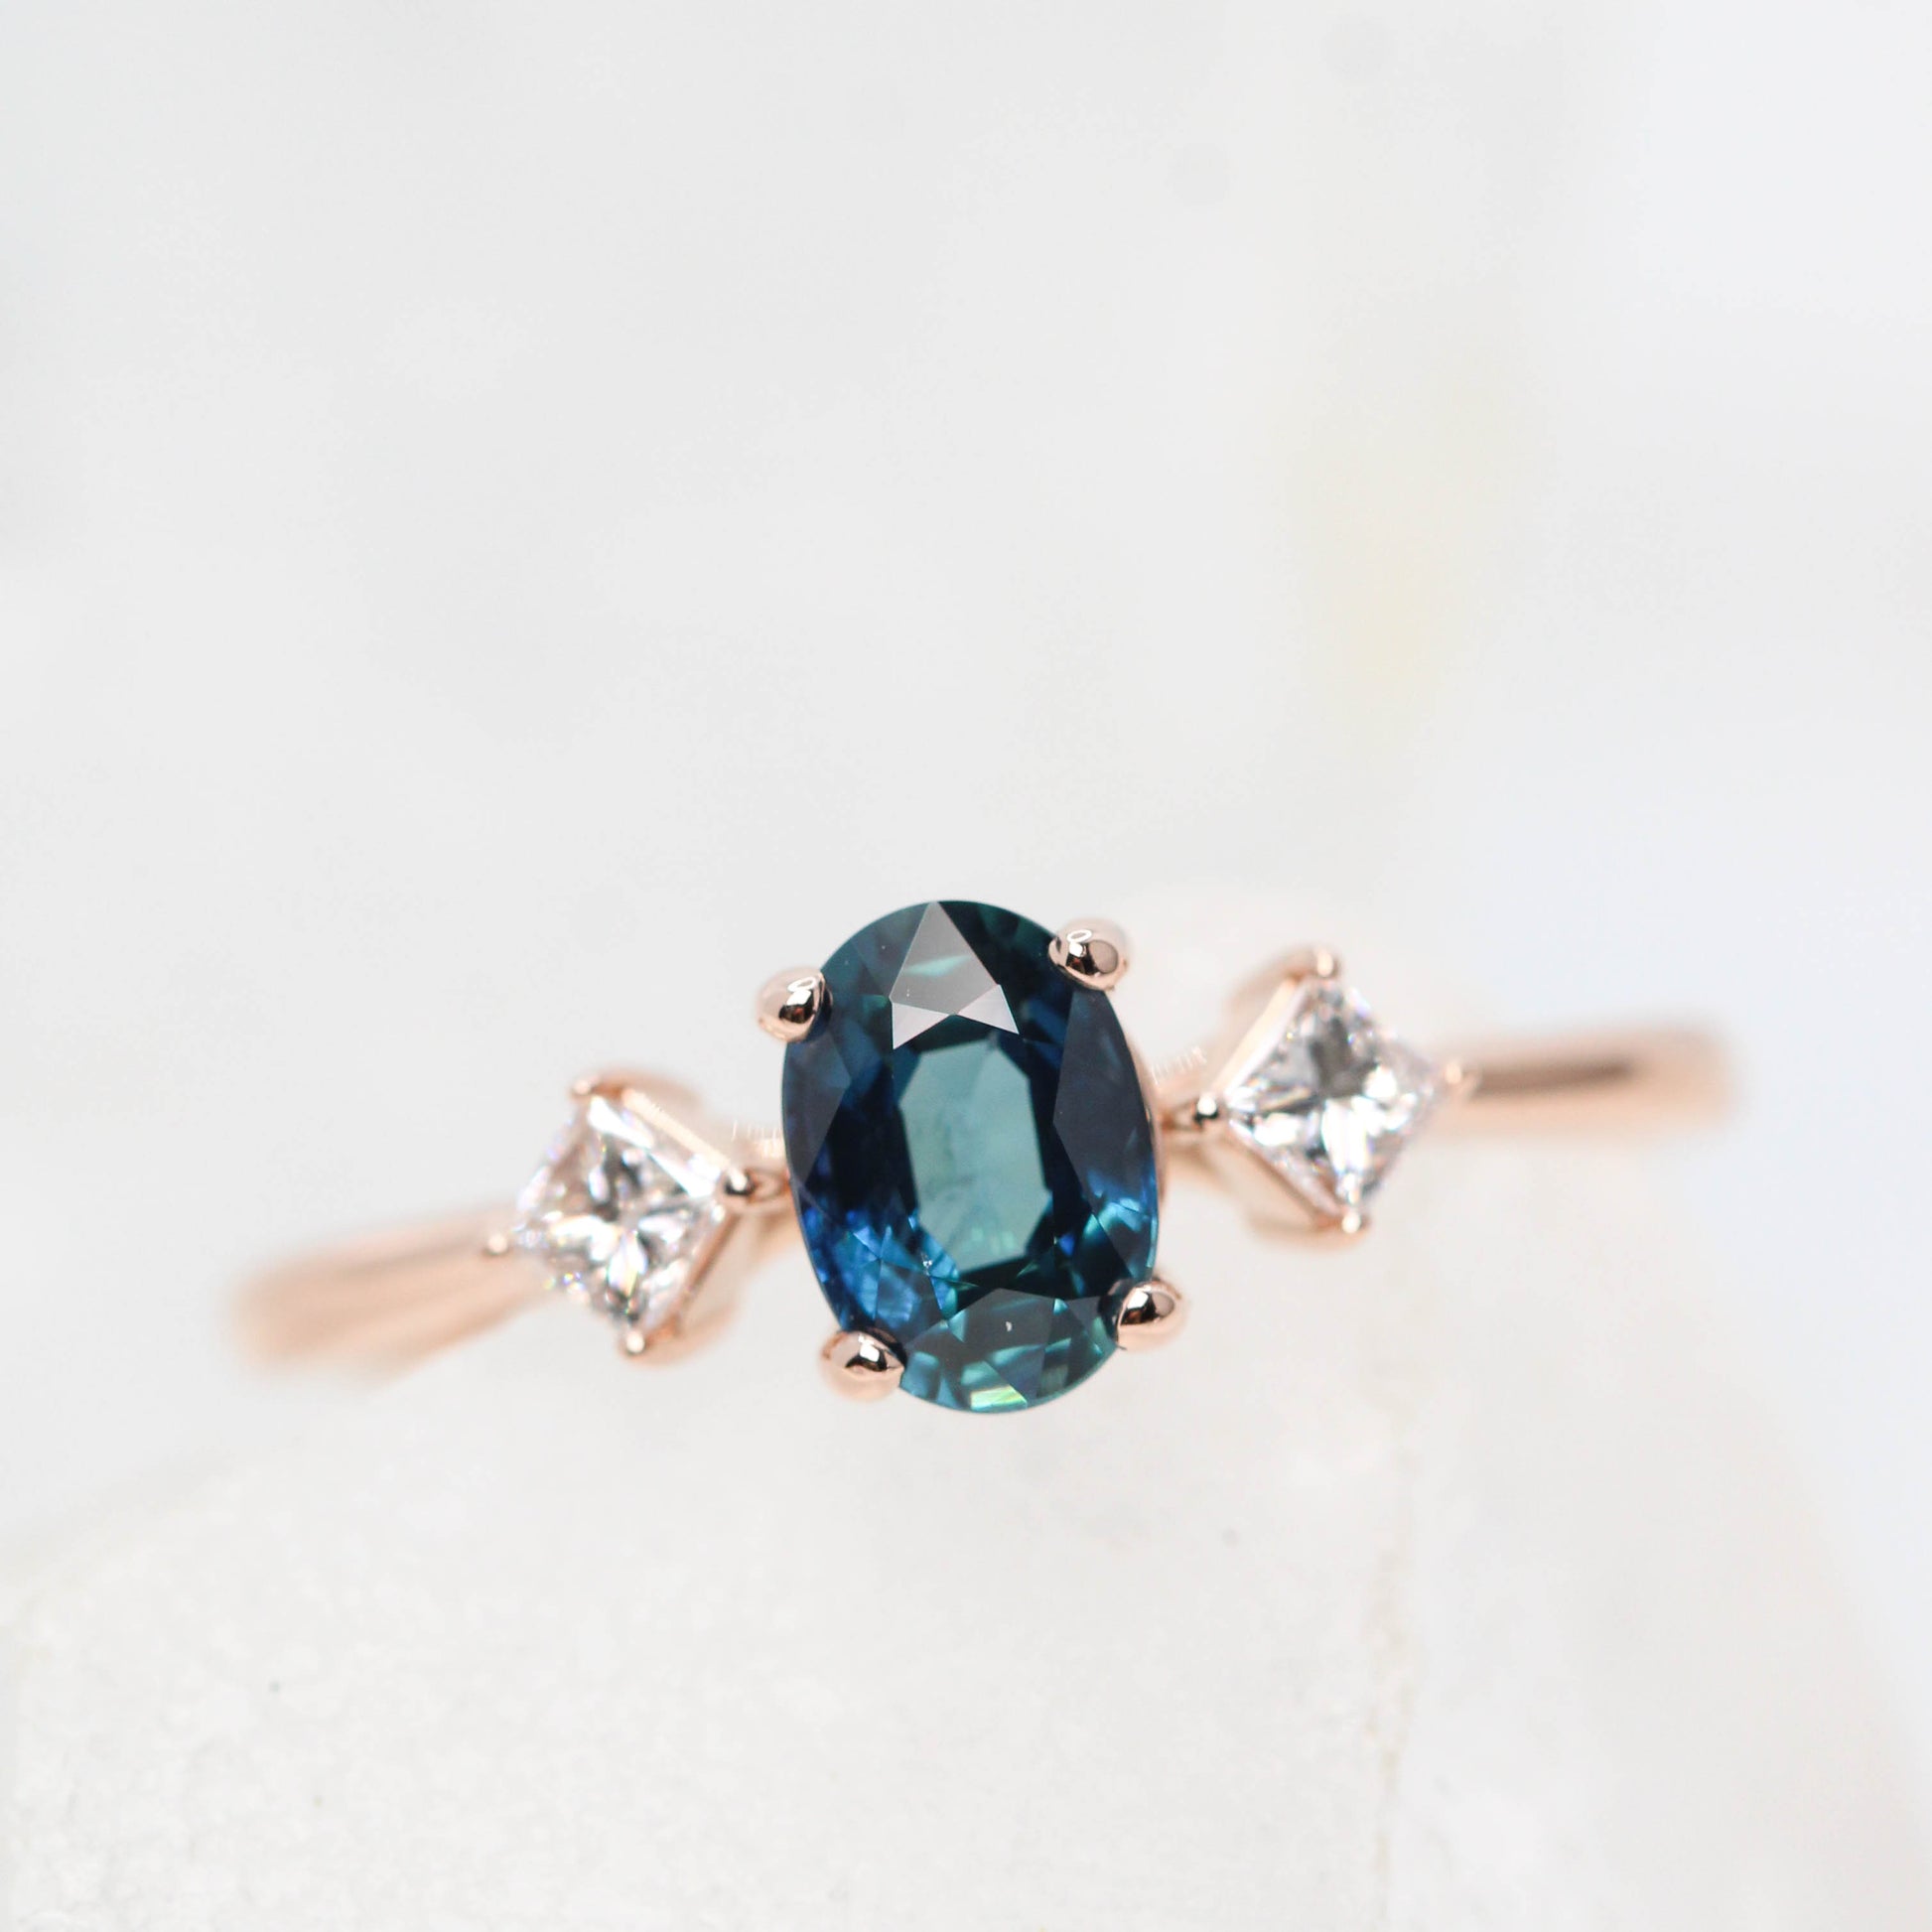 Angelique Ring with a 1.07 Carat Teal Oval Madagascar Sapphire and White Accent Diamonds in 14k Rose Gold - Ready to Size and Ship - Midwinter Co. Alternative Bridal Rings and Modern Fine Jewelry